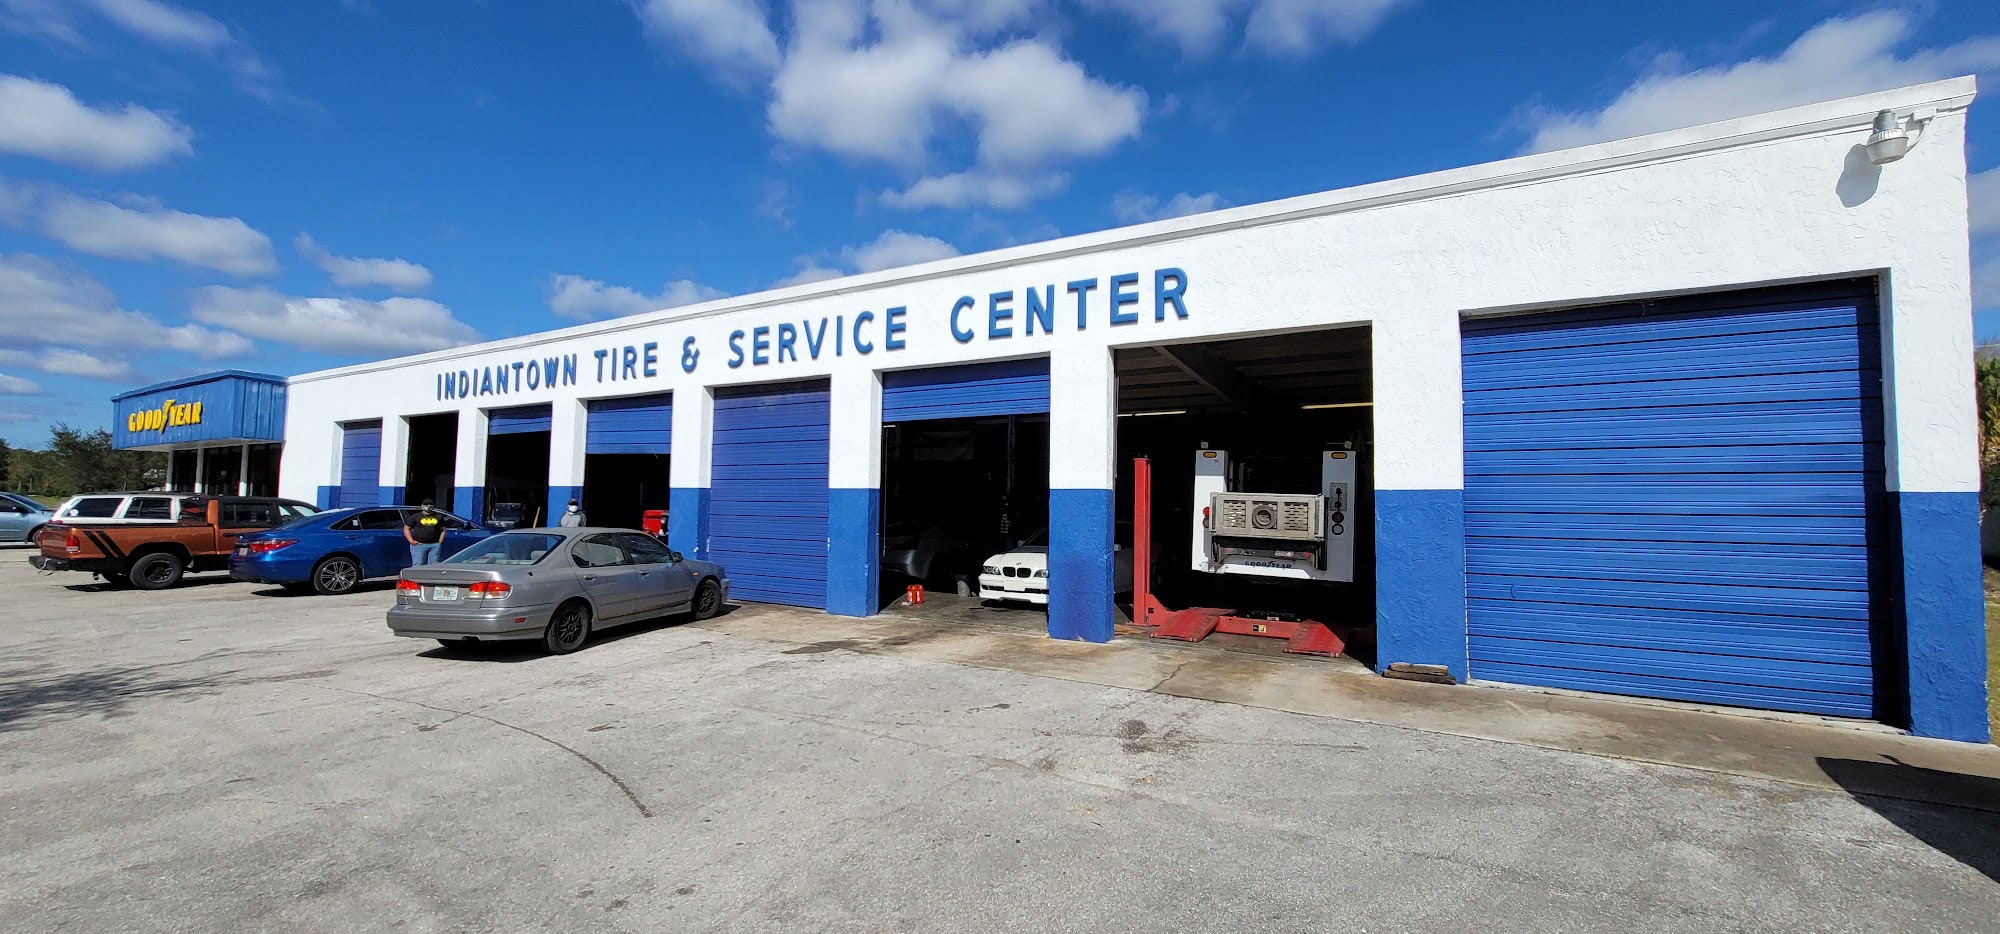 INDIANTOWN TIRE AND SERVICE